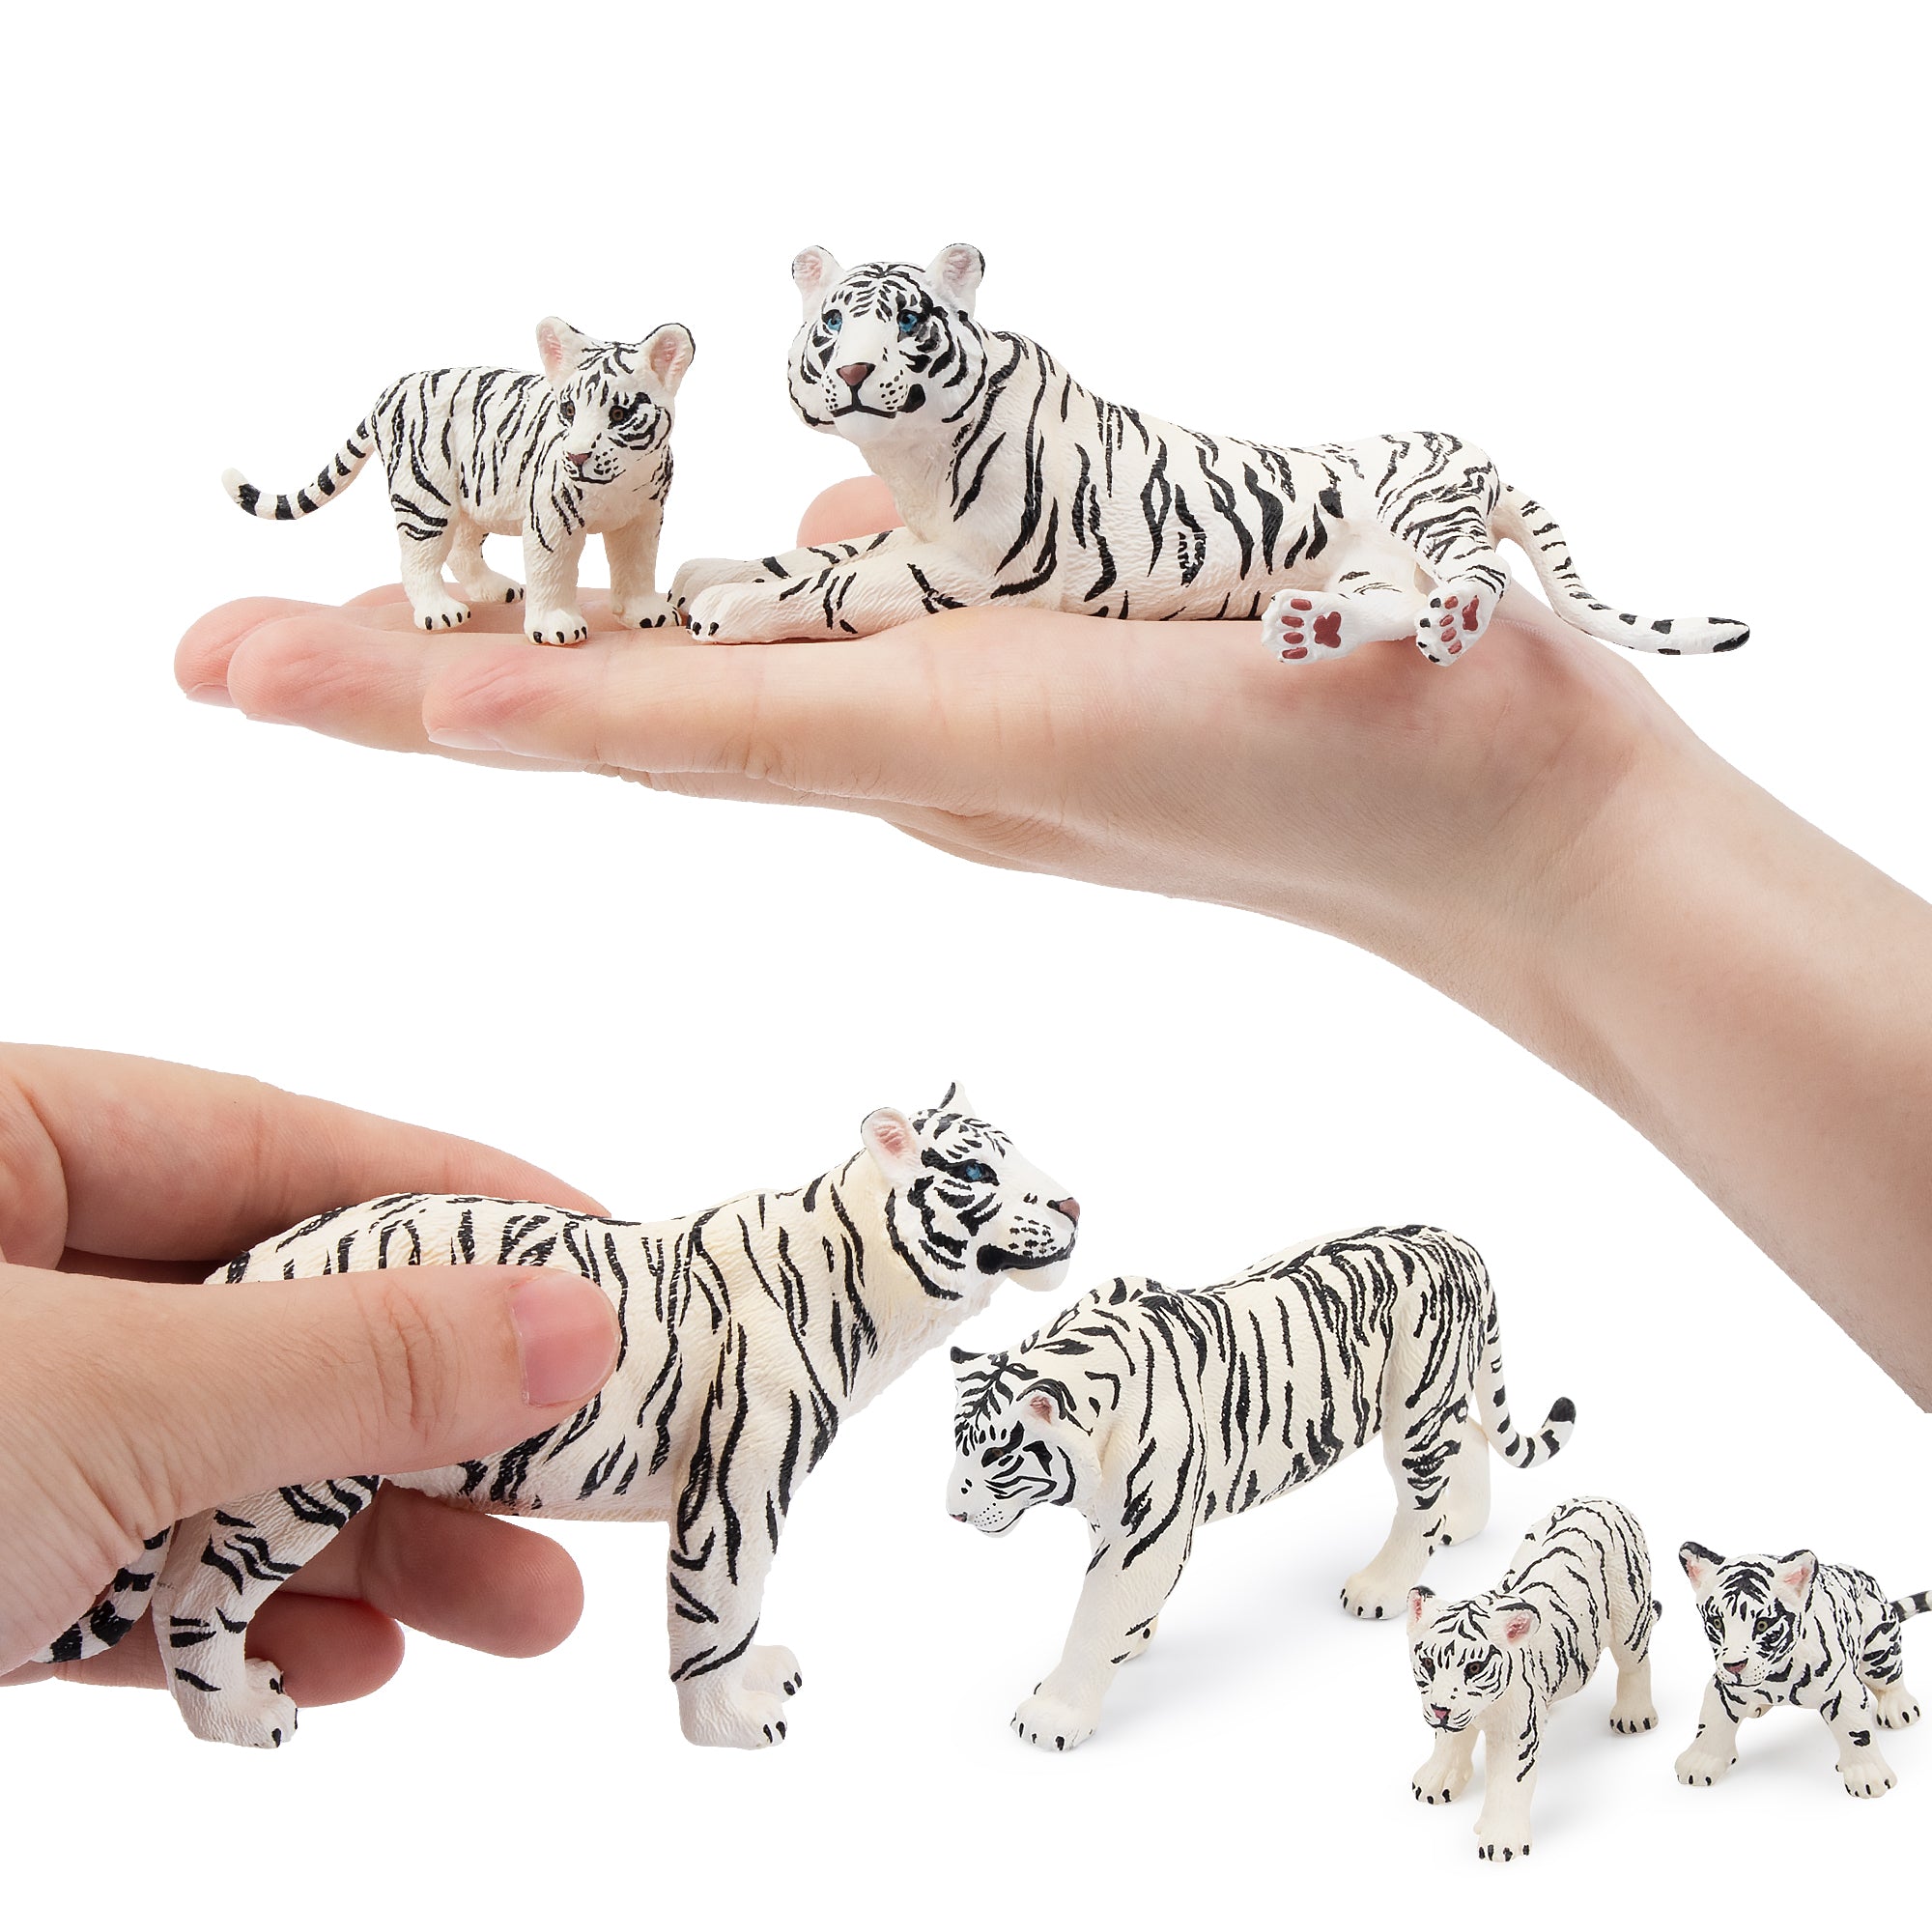 6-Piece White Tigers Family Figurines Playset-on hand